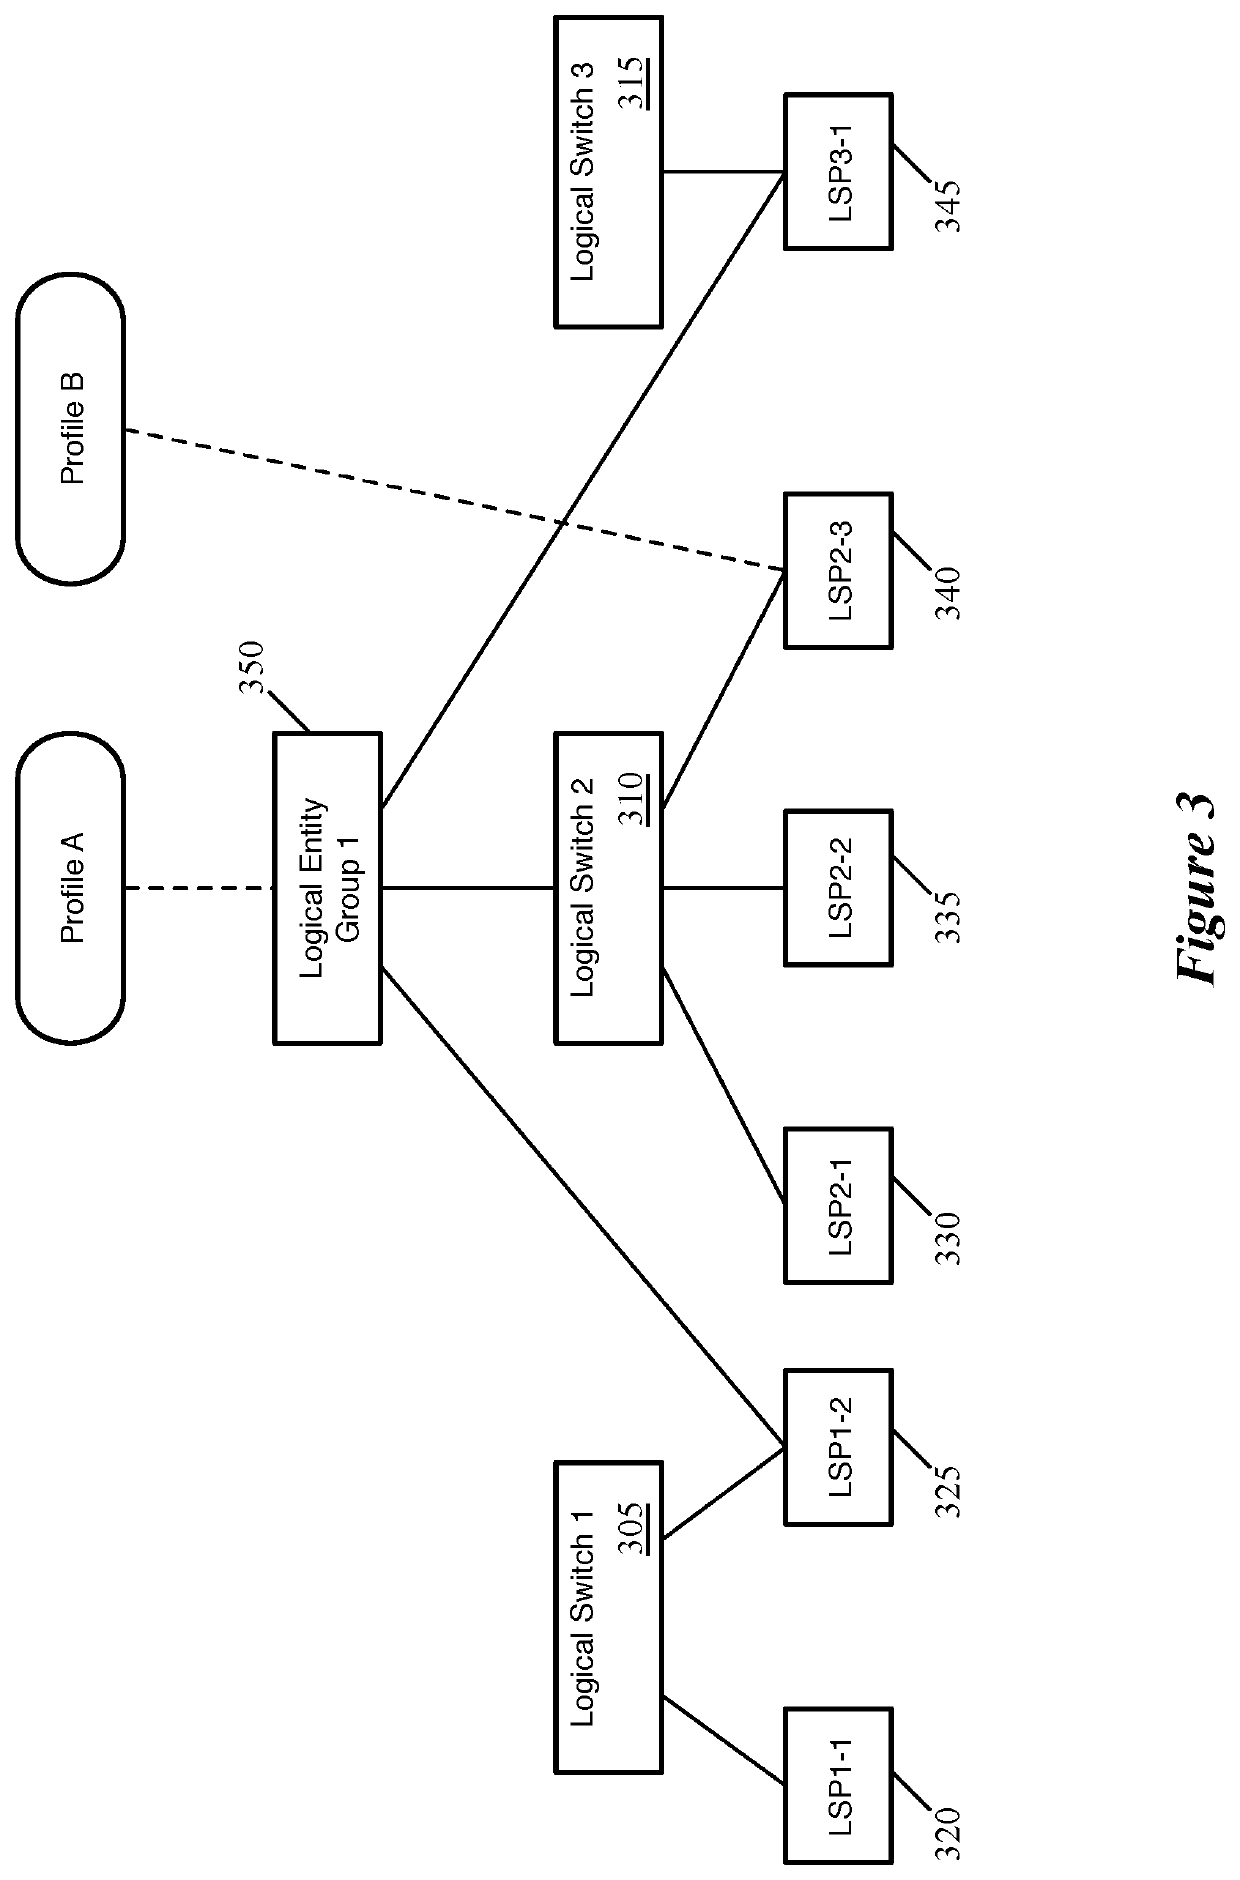 Application of profile setting groups to logical network entities